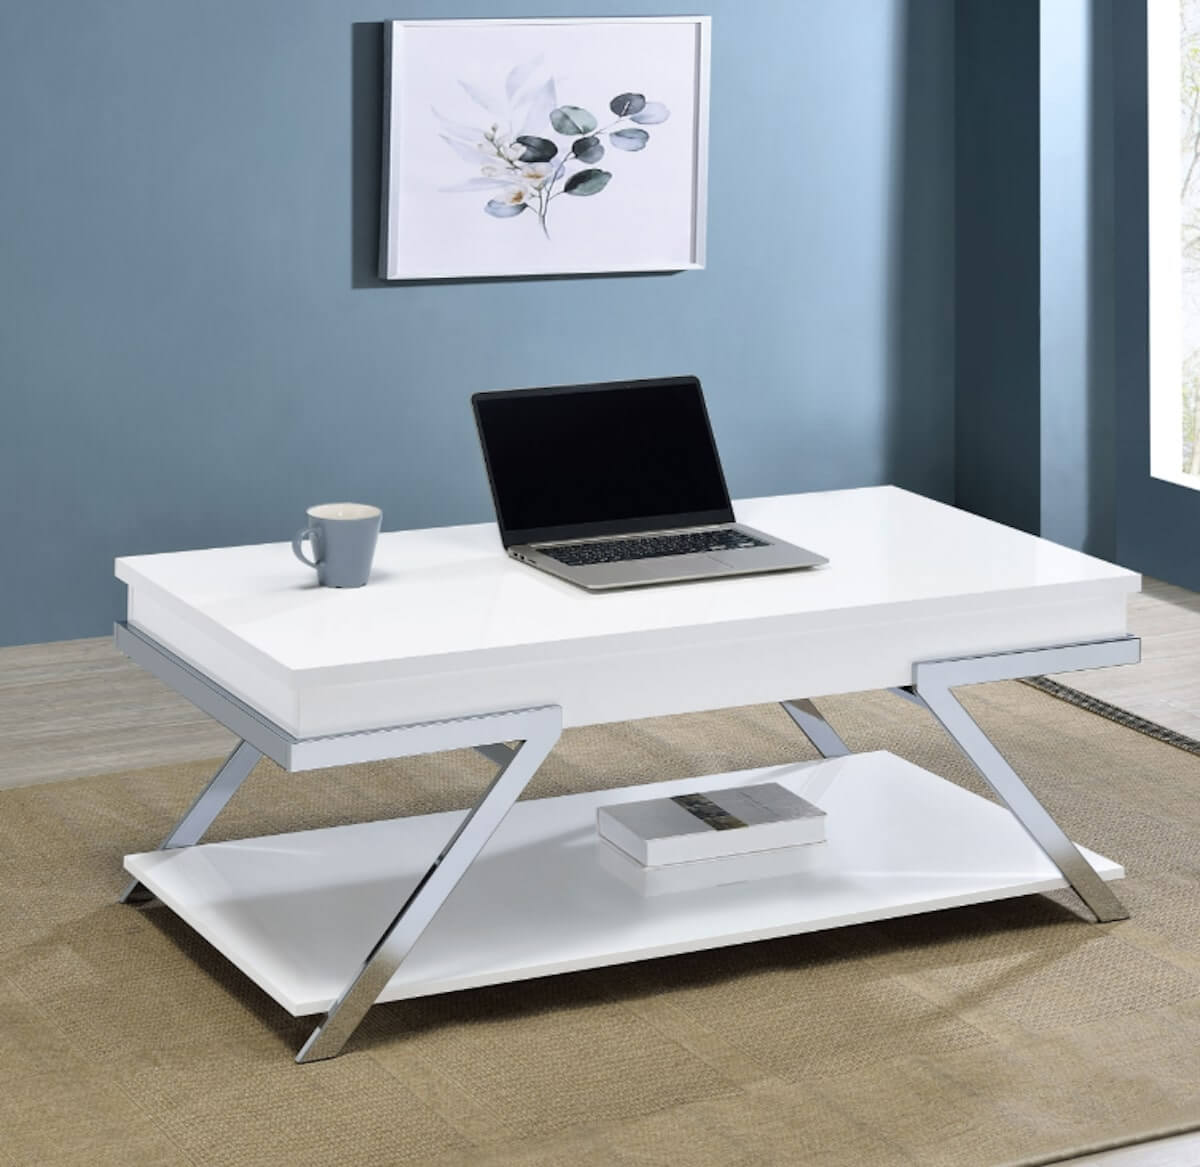 Modern coffee table with storage: Marcia Wood Rectangular Lift Top Coffee Table White High Gloss and Chrome